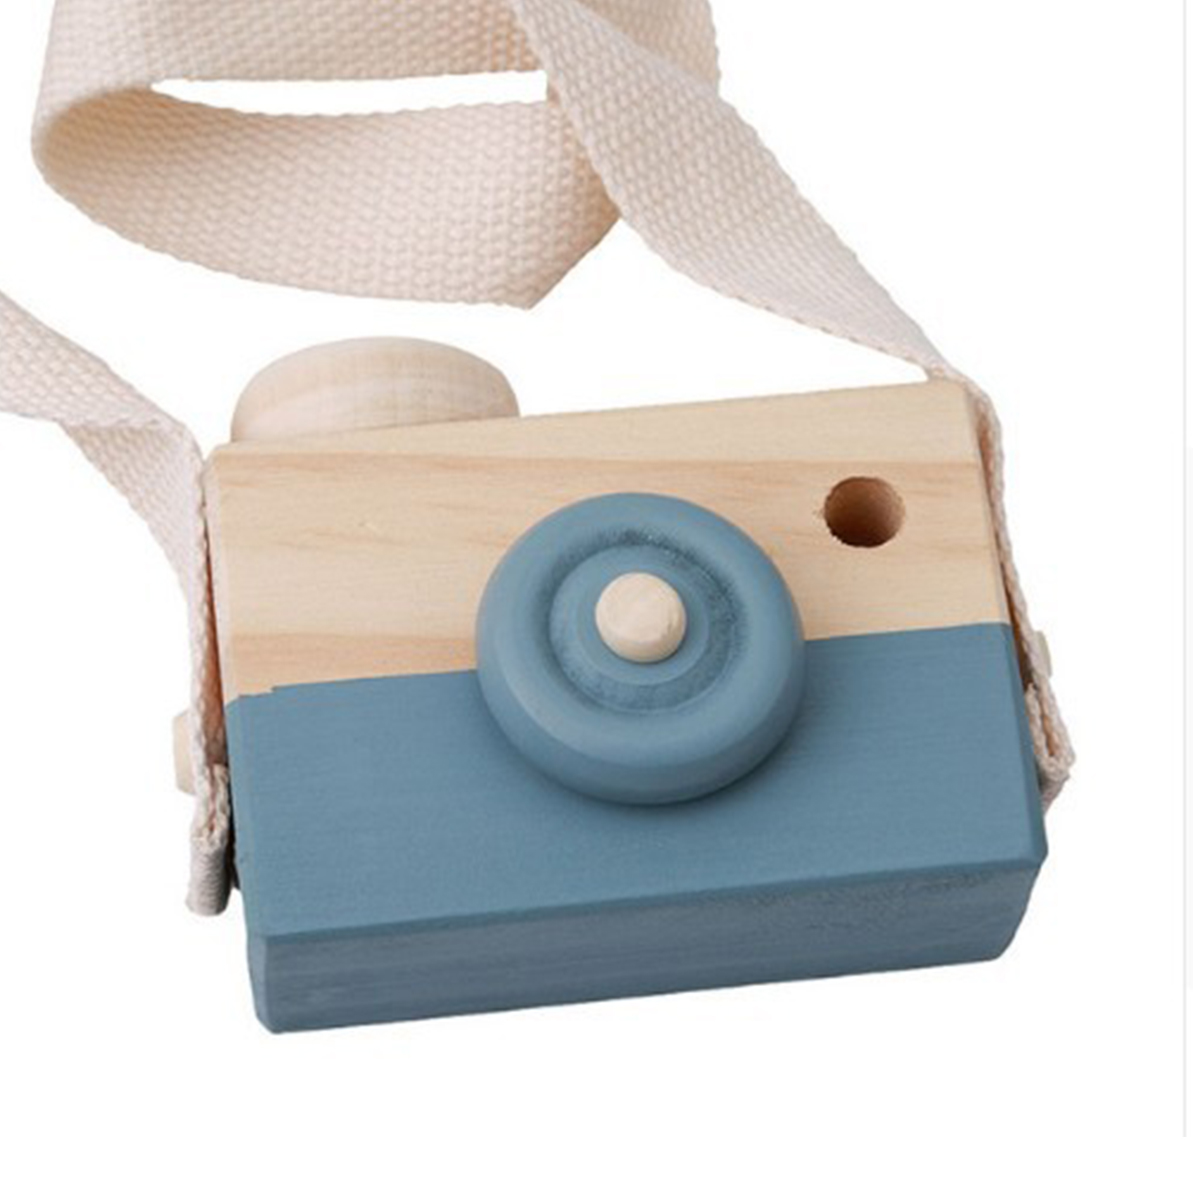 Wearable-Childrens-Wooden-Camera-Ornaments-Mini-Portable-Educational-Toys-Photography-Cute-Props-1573498-8